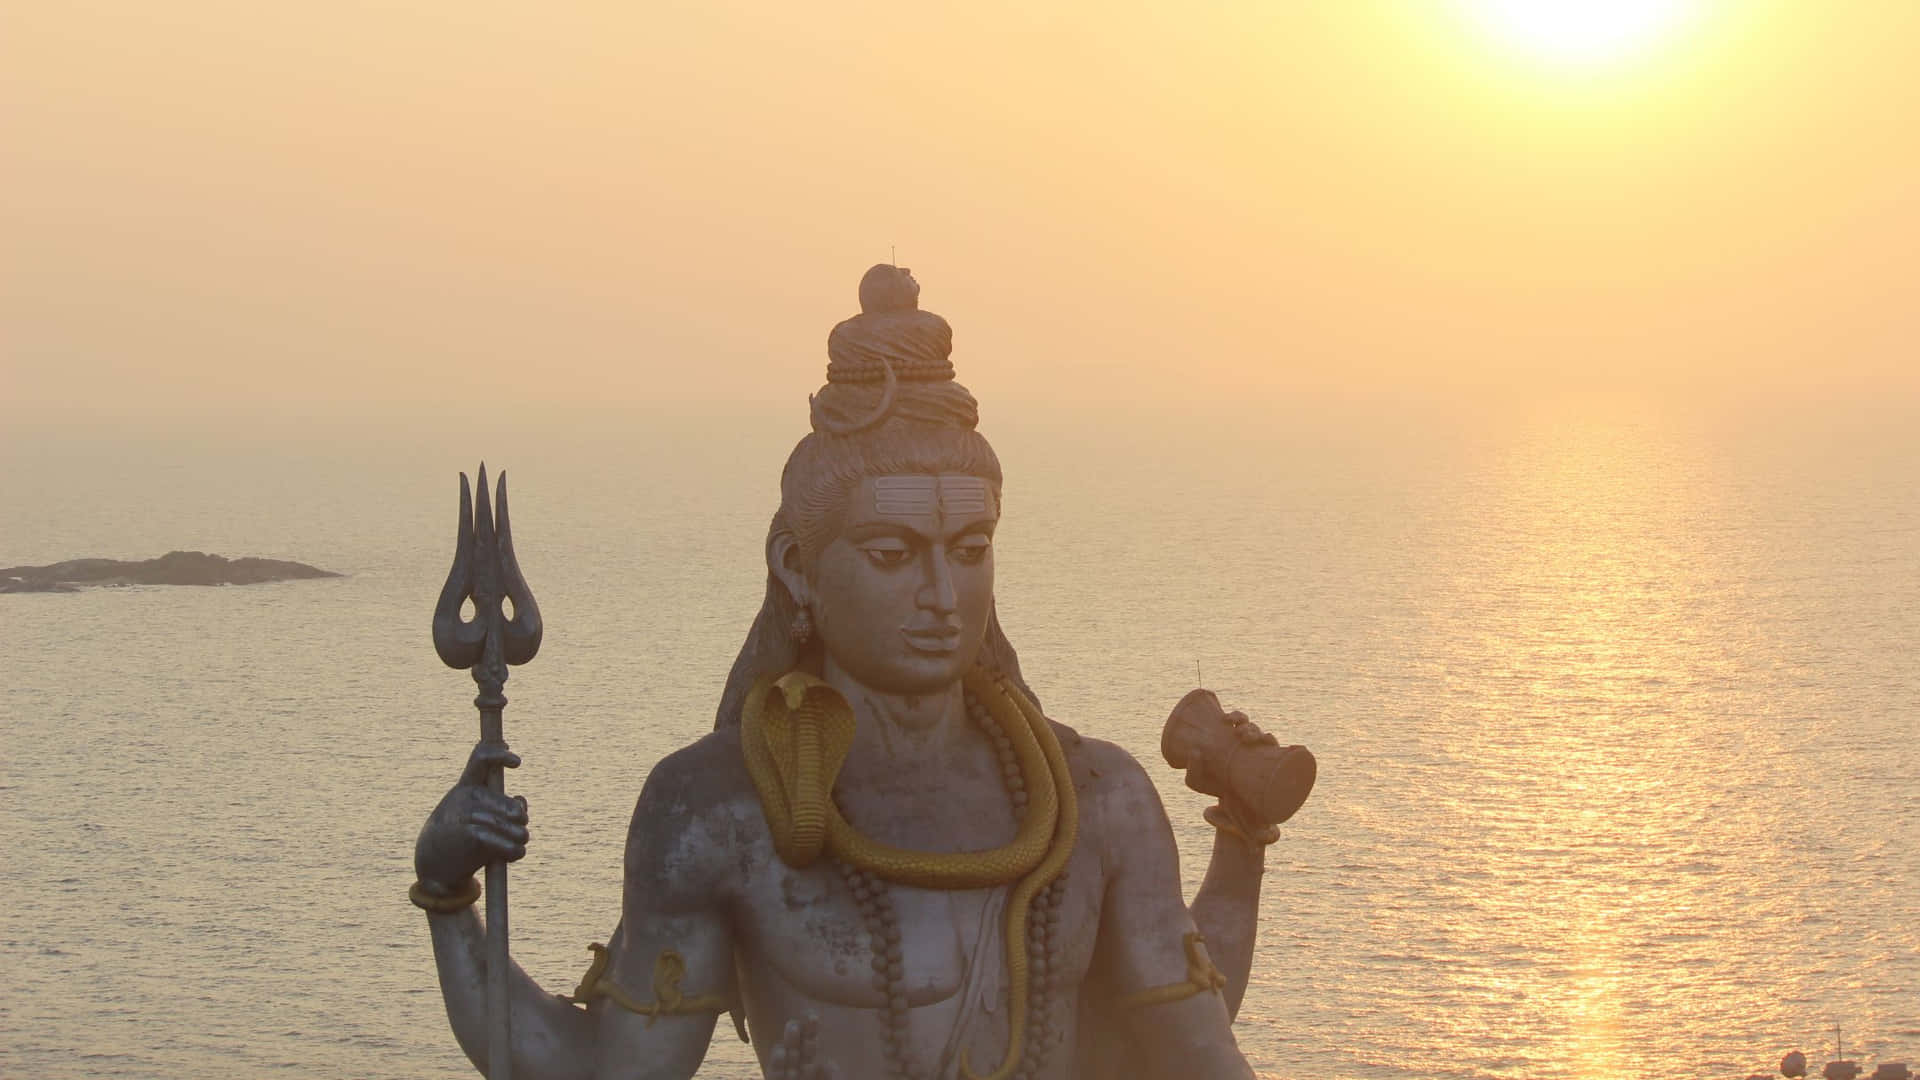 Lord Shiva - The Supreme Lord of the Universe